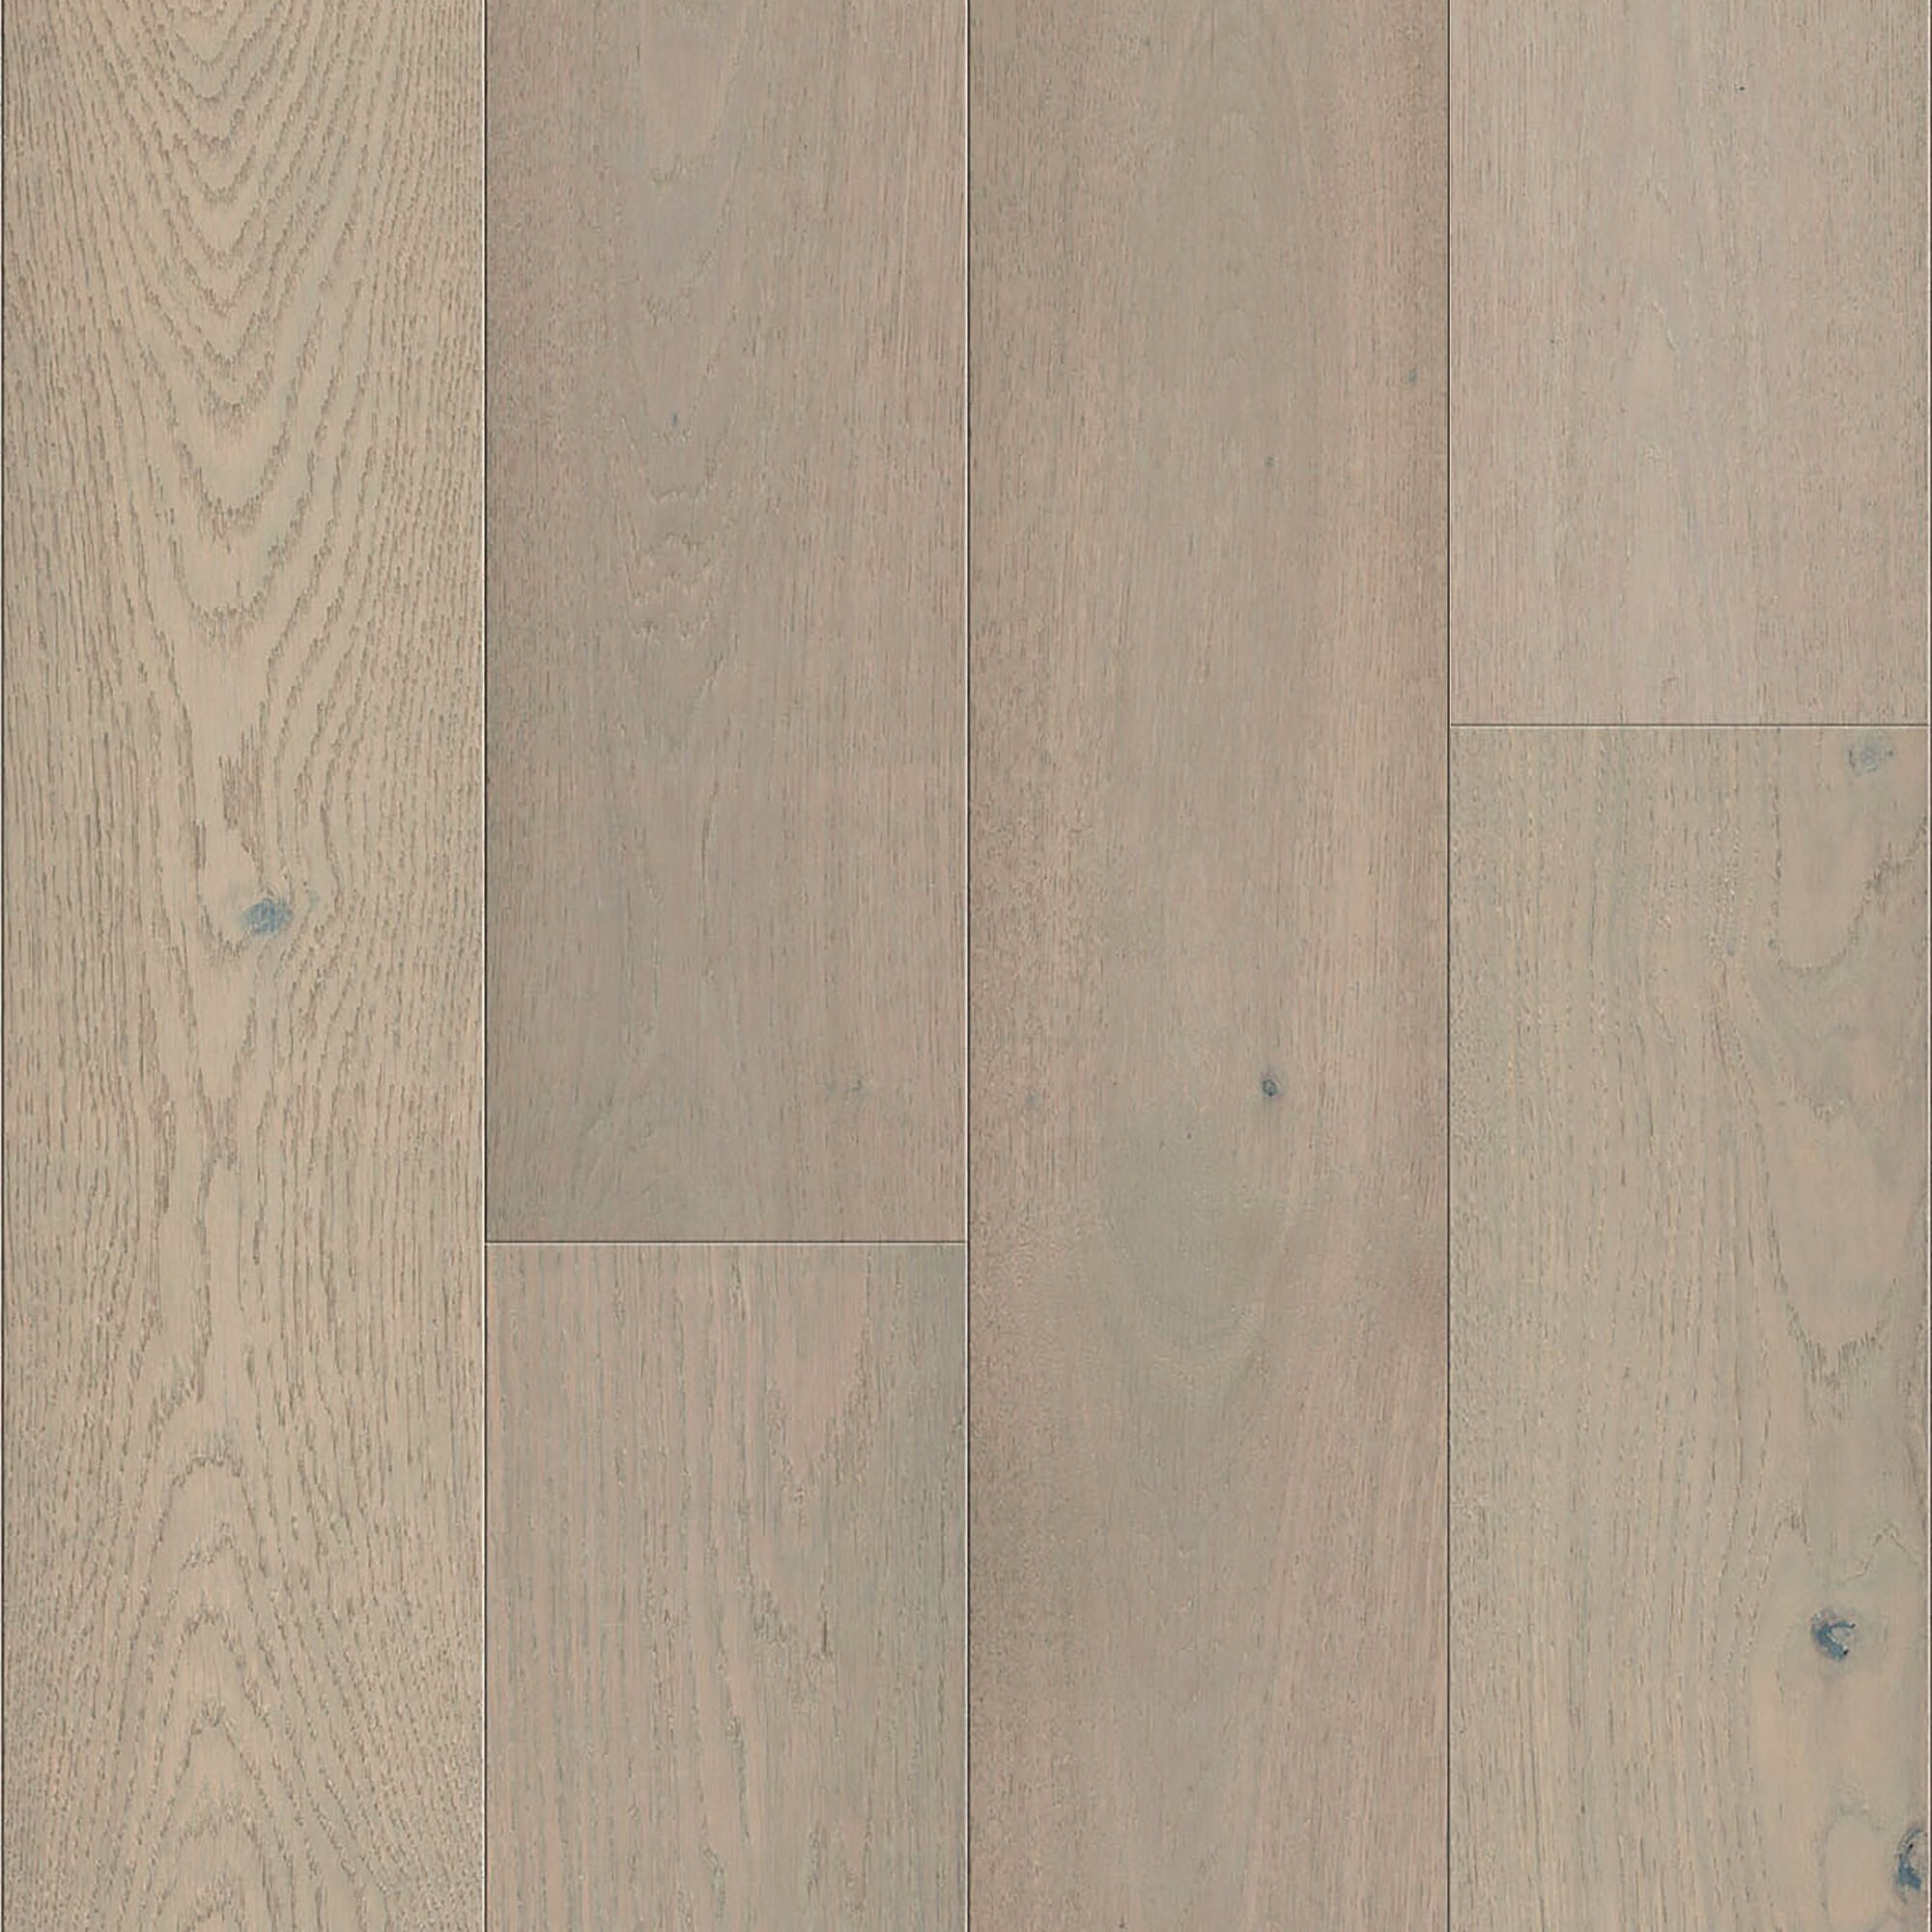 CALI Core Pacific Oak x 11/32-in x Varying Length Wirebrushed Waterproof Engineered Hardwood Flooring (23.31-sq ft) at Lowes.com